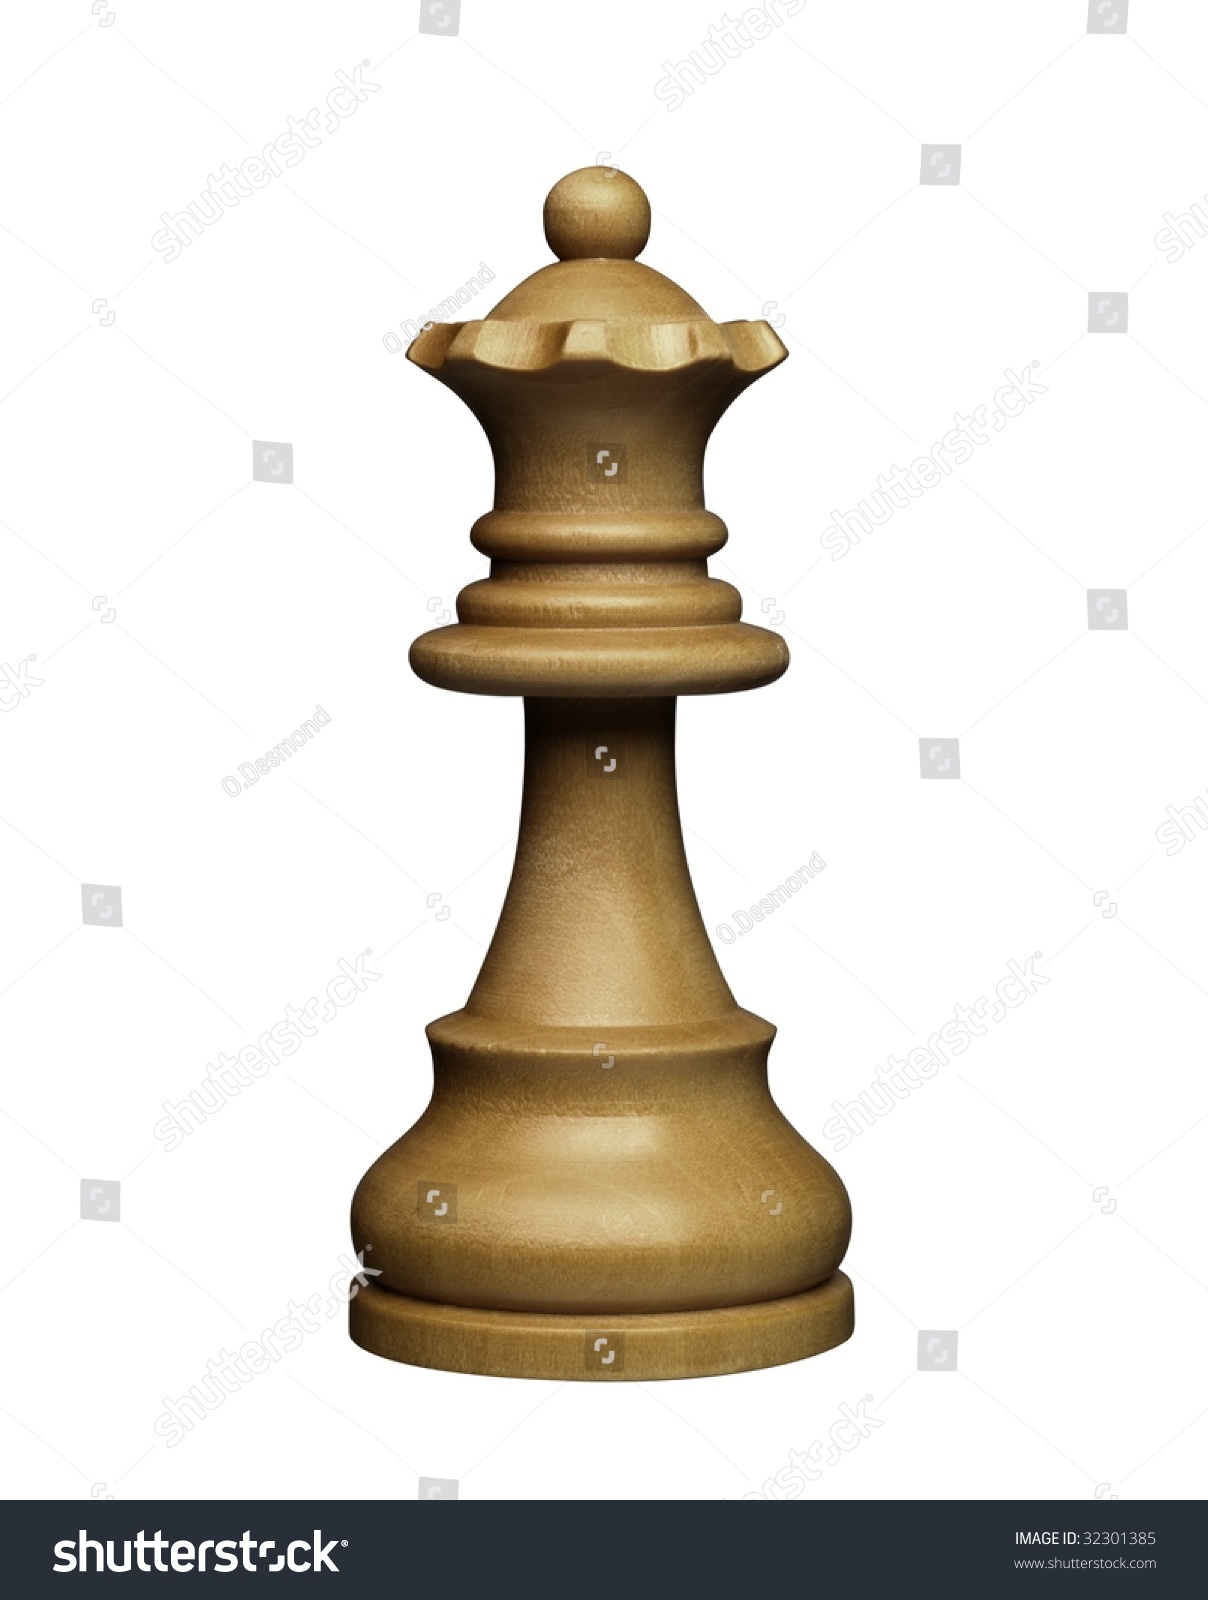 Brown Queen Chess Figur (+Clipping Path, High Resolution) Stock Photo ...